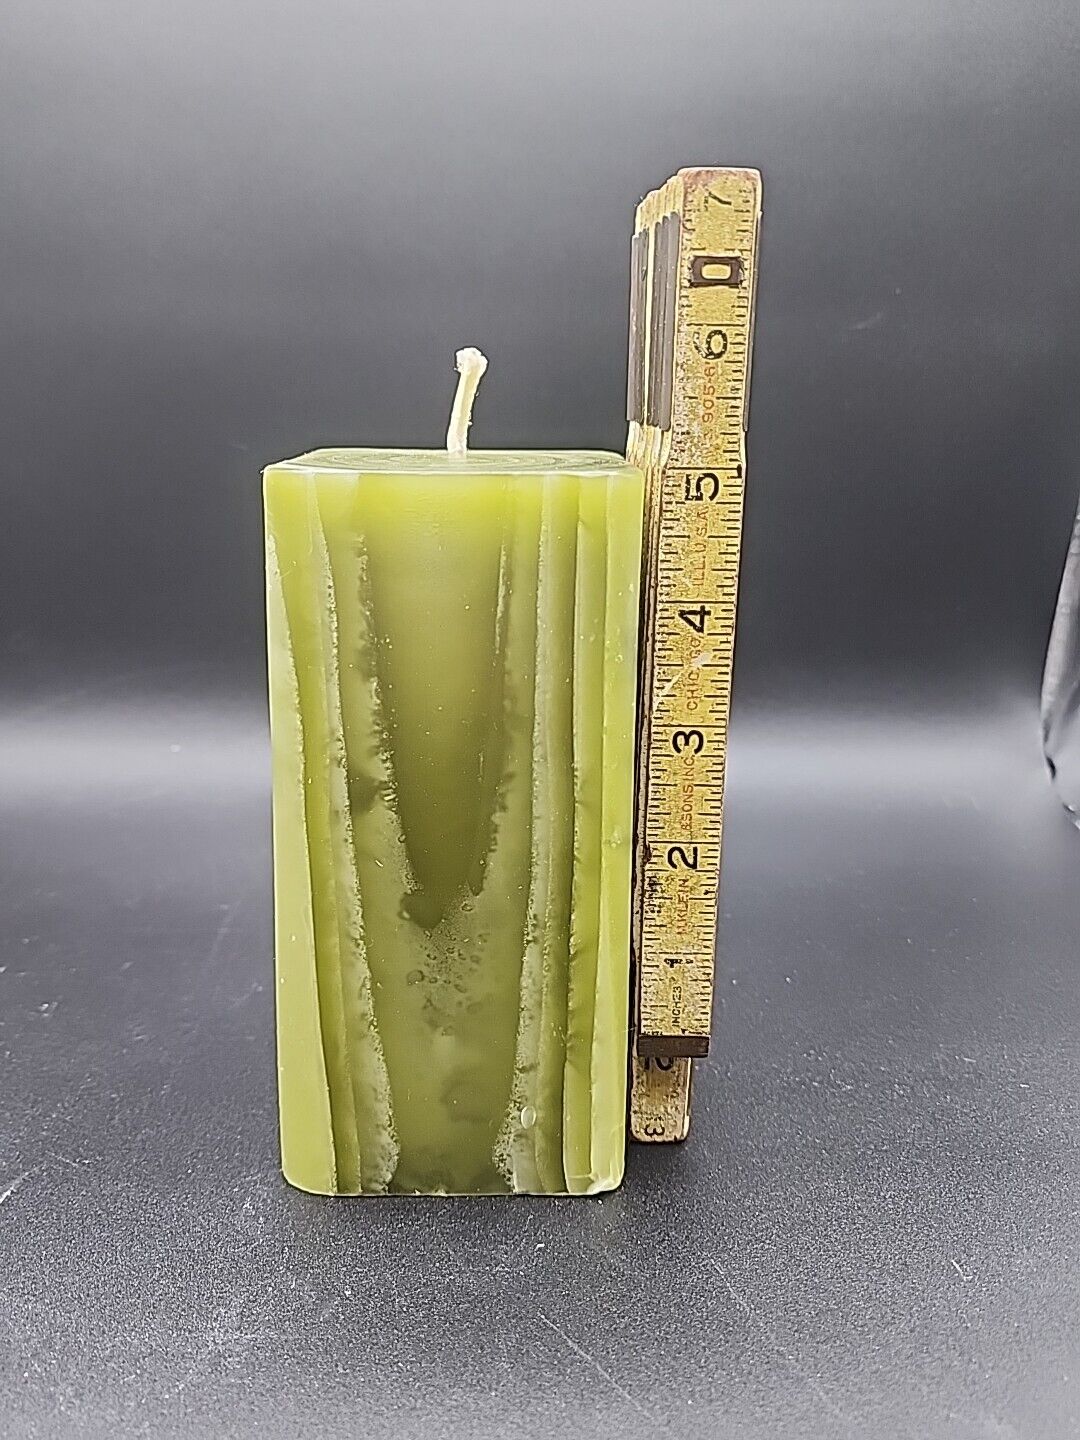 Partylite Lemongrass 3 x 6 Square Pillar Candle. Green Swirl New With Box K13567